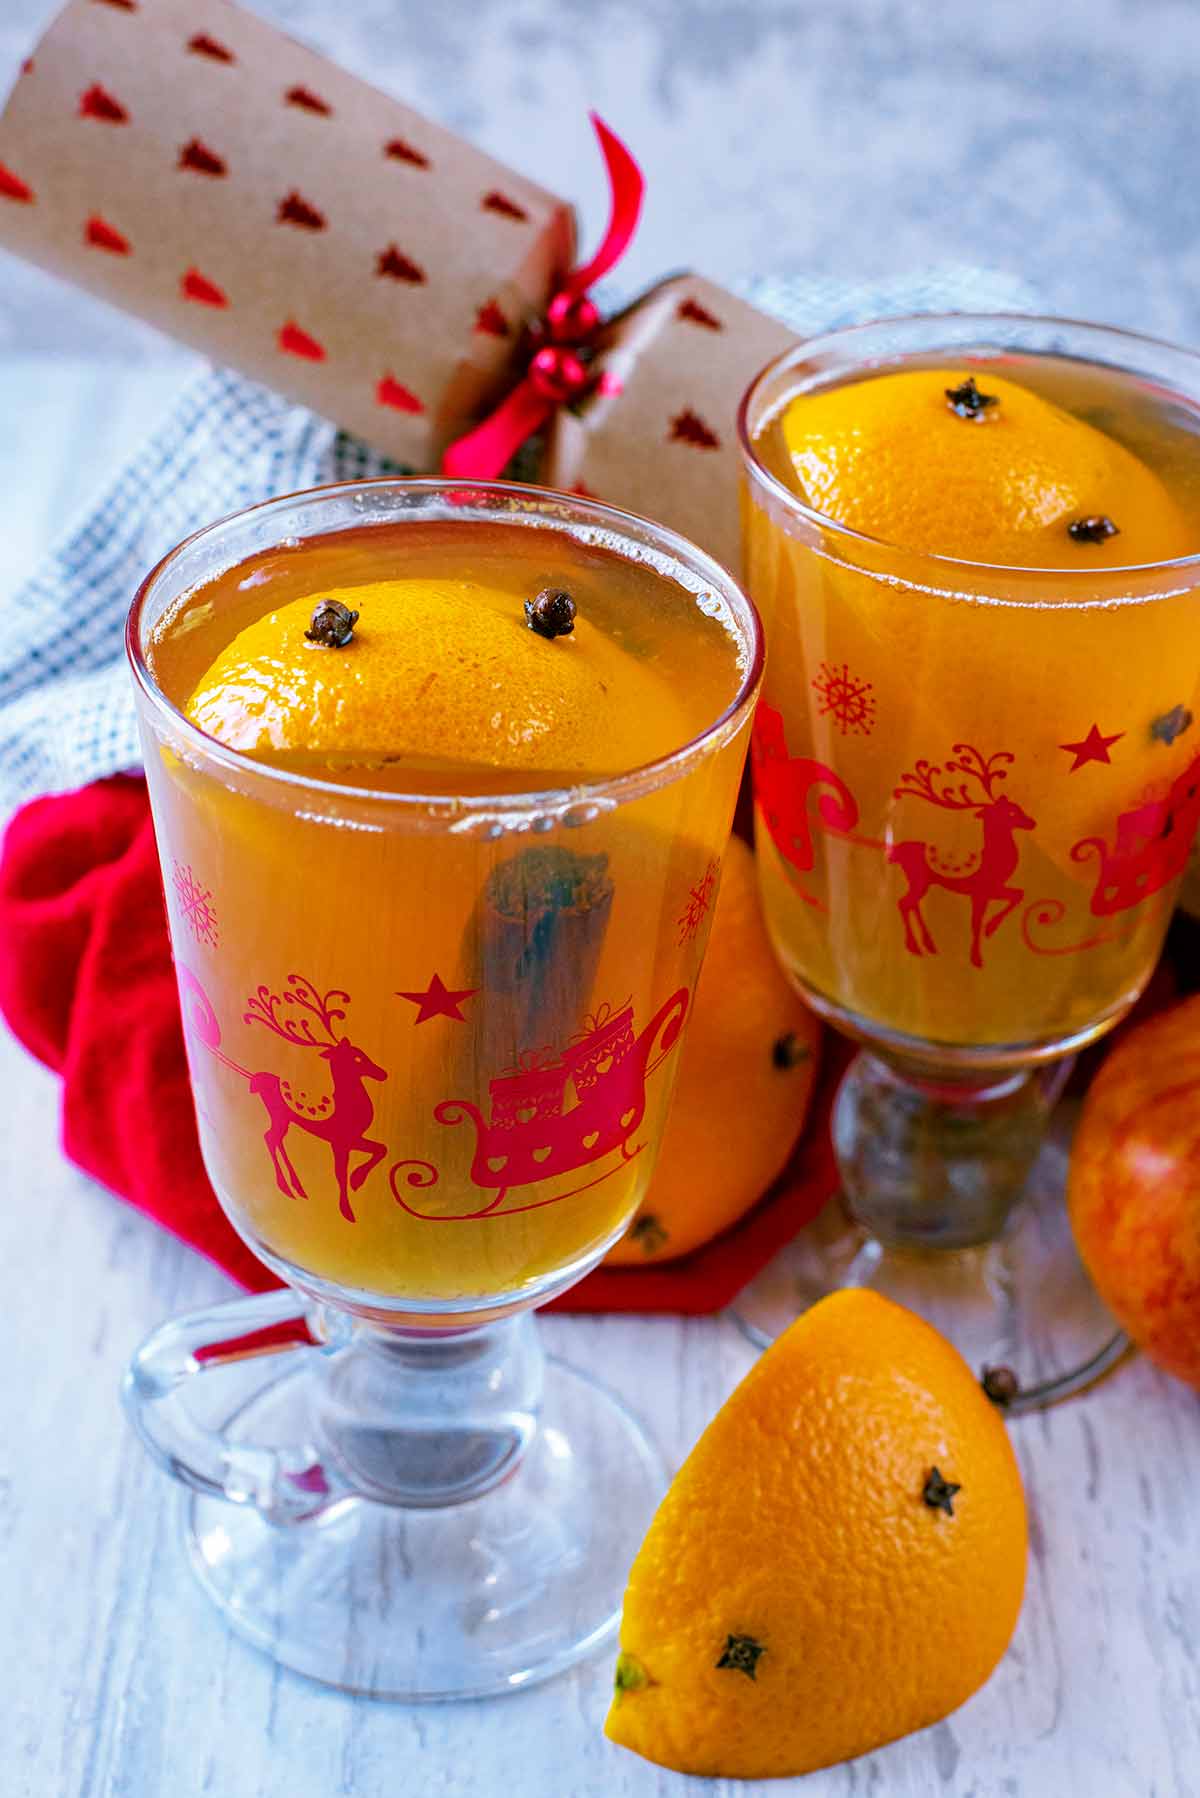 Two glasses of Mulled Apple Juice with orange wedges and a Christmas cracker.